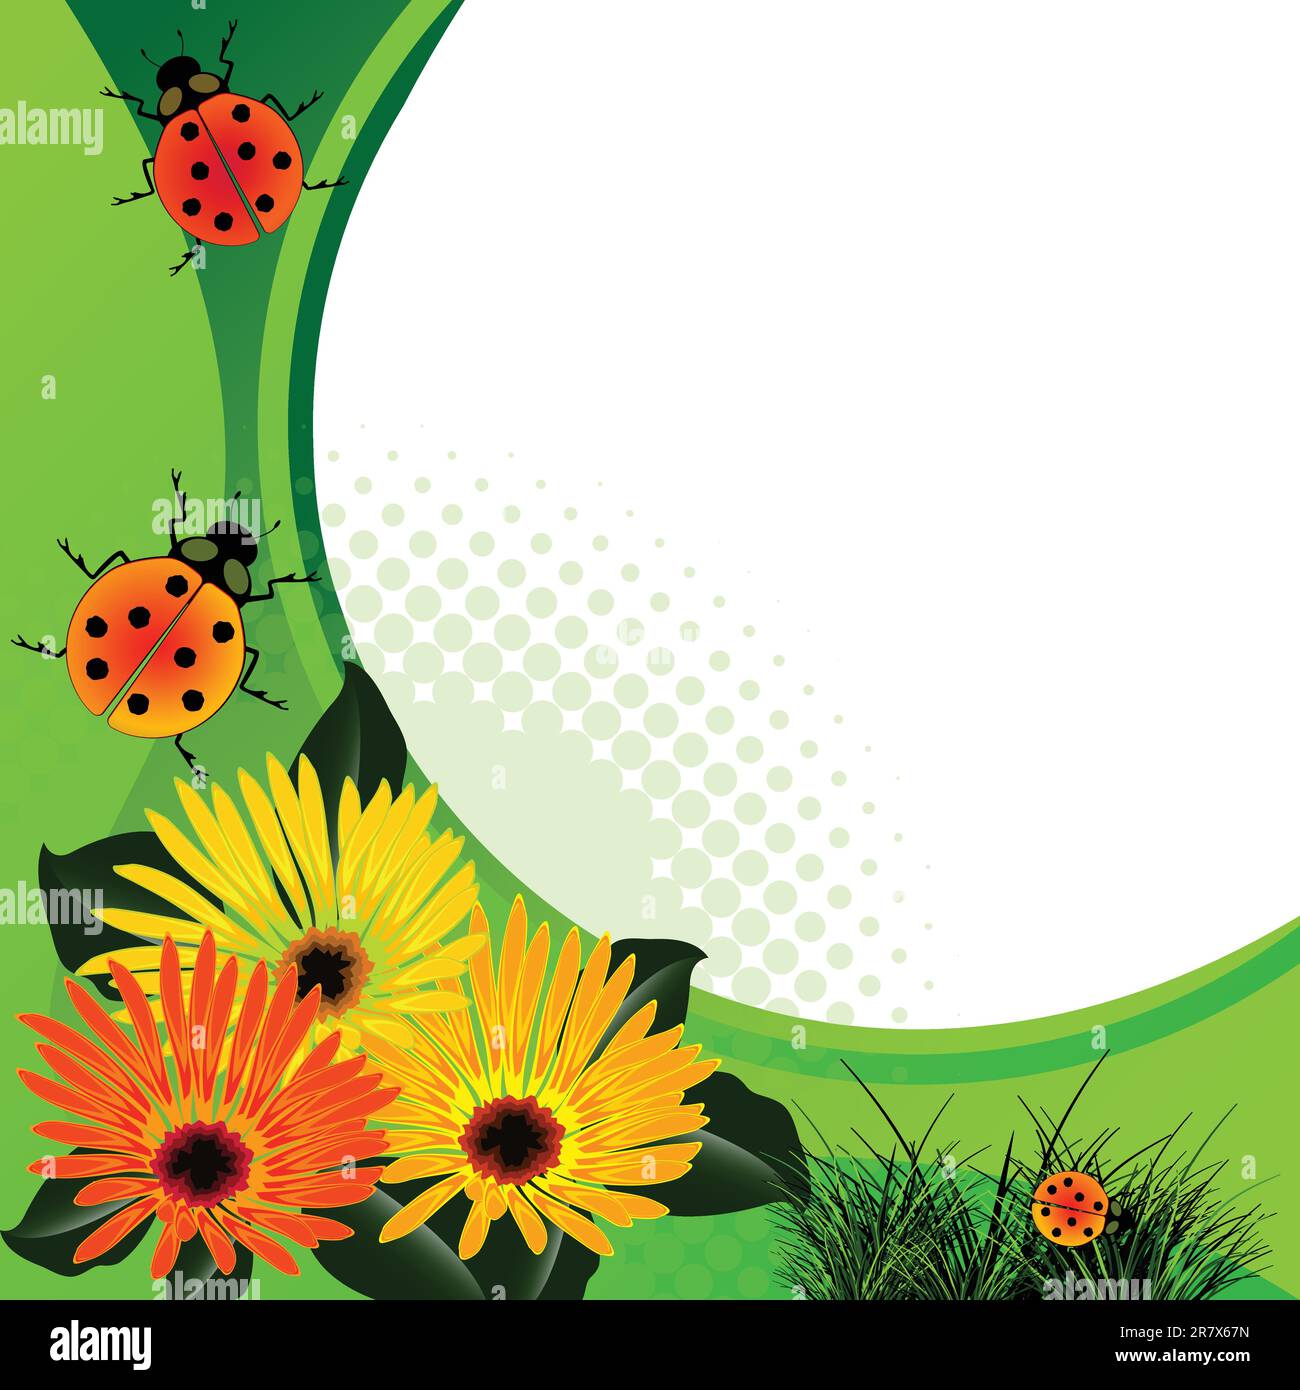 ladybugs over abstract floral background, vector art illustration Stock Vector